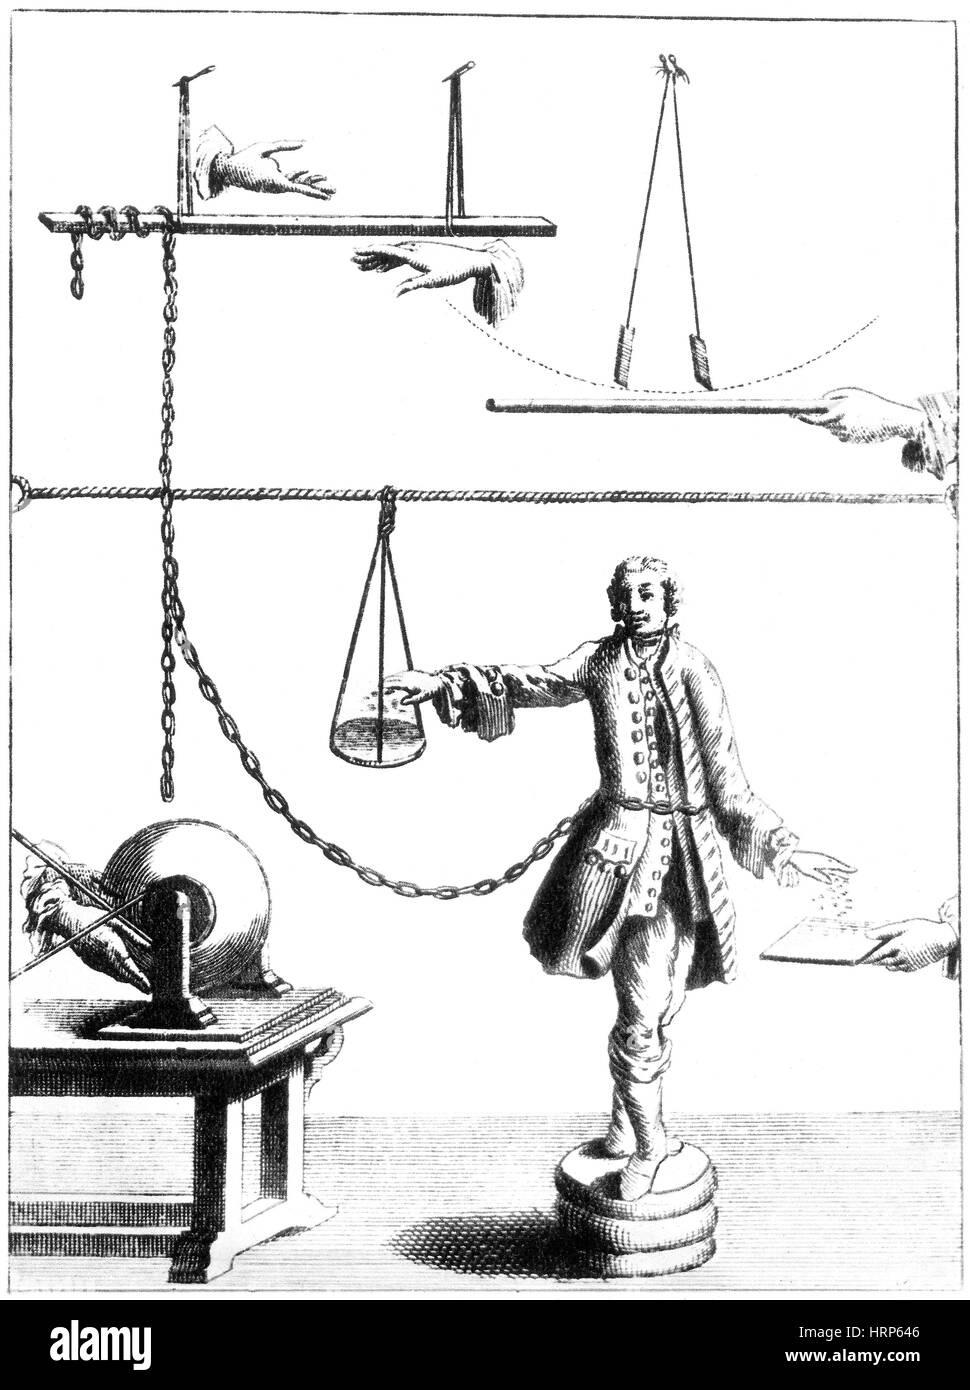 Nollet's Static Electric Experiment, 1746 Stock Photo